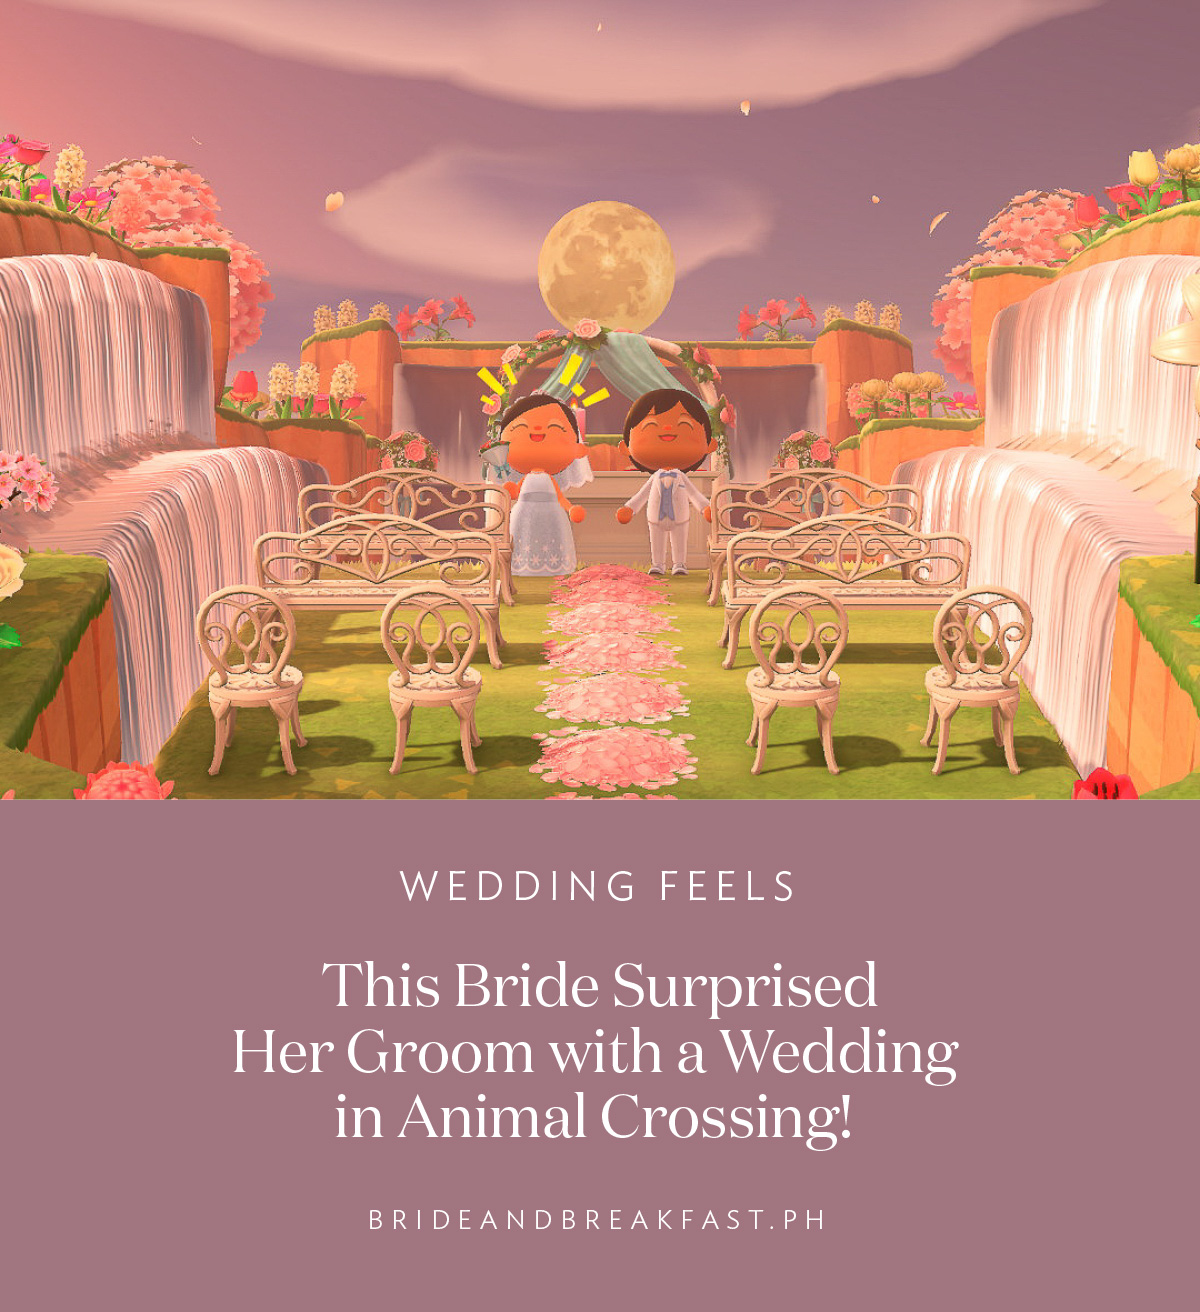 This Bride Surprised His Groom with a Wedding in Animal Crossing! 